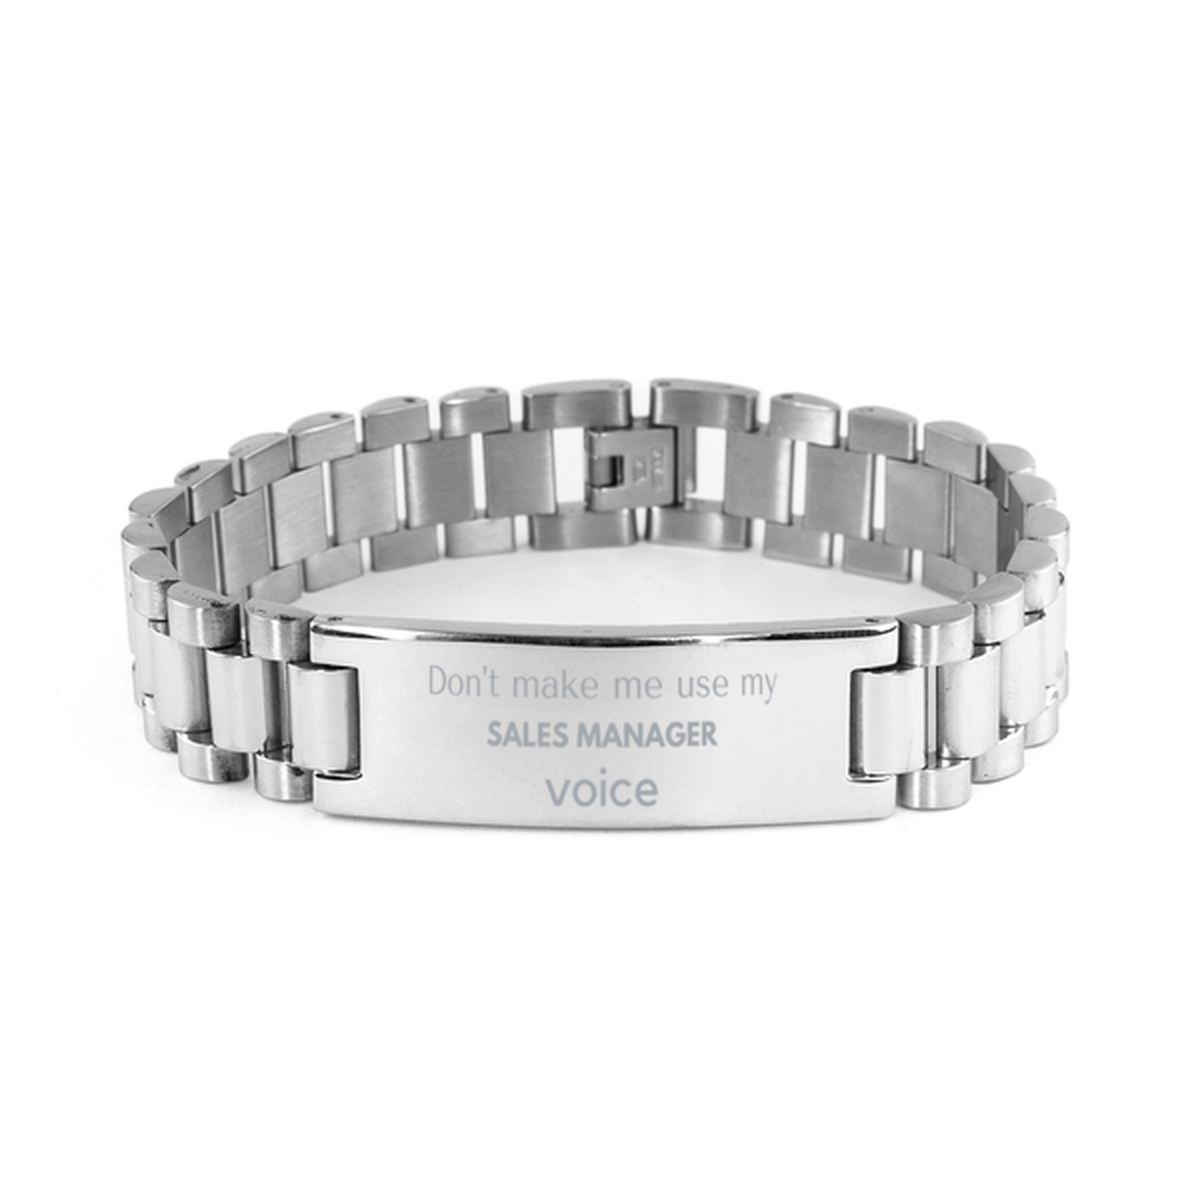 Don't make me use my Sales Manager voice, Sarcasm Sales Manager Gifts, Christmas Sales Manager Ladder Stainless Steel Bracelet Birthday Unique Gifts For Sales Manager Coworkers, Men, Women, Colleague, Friends